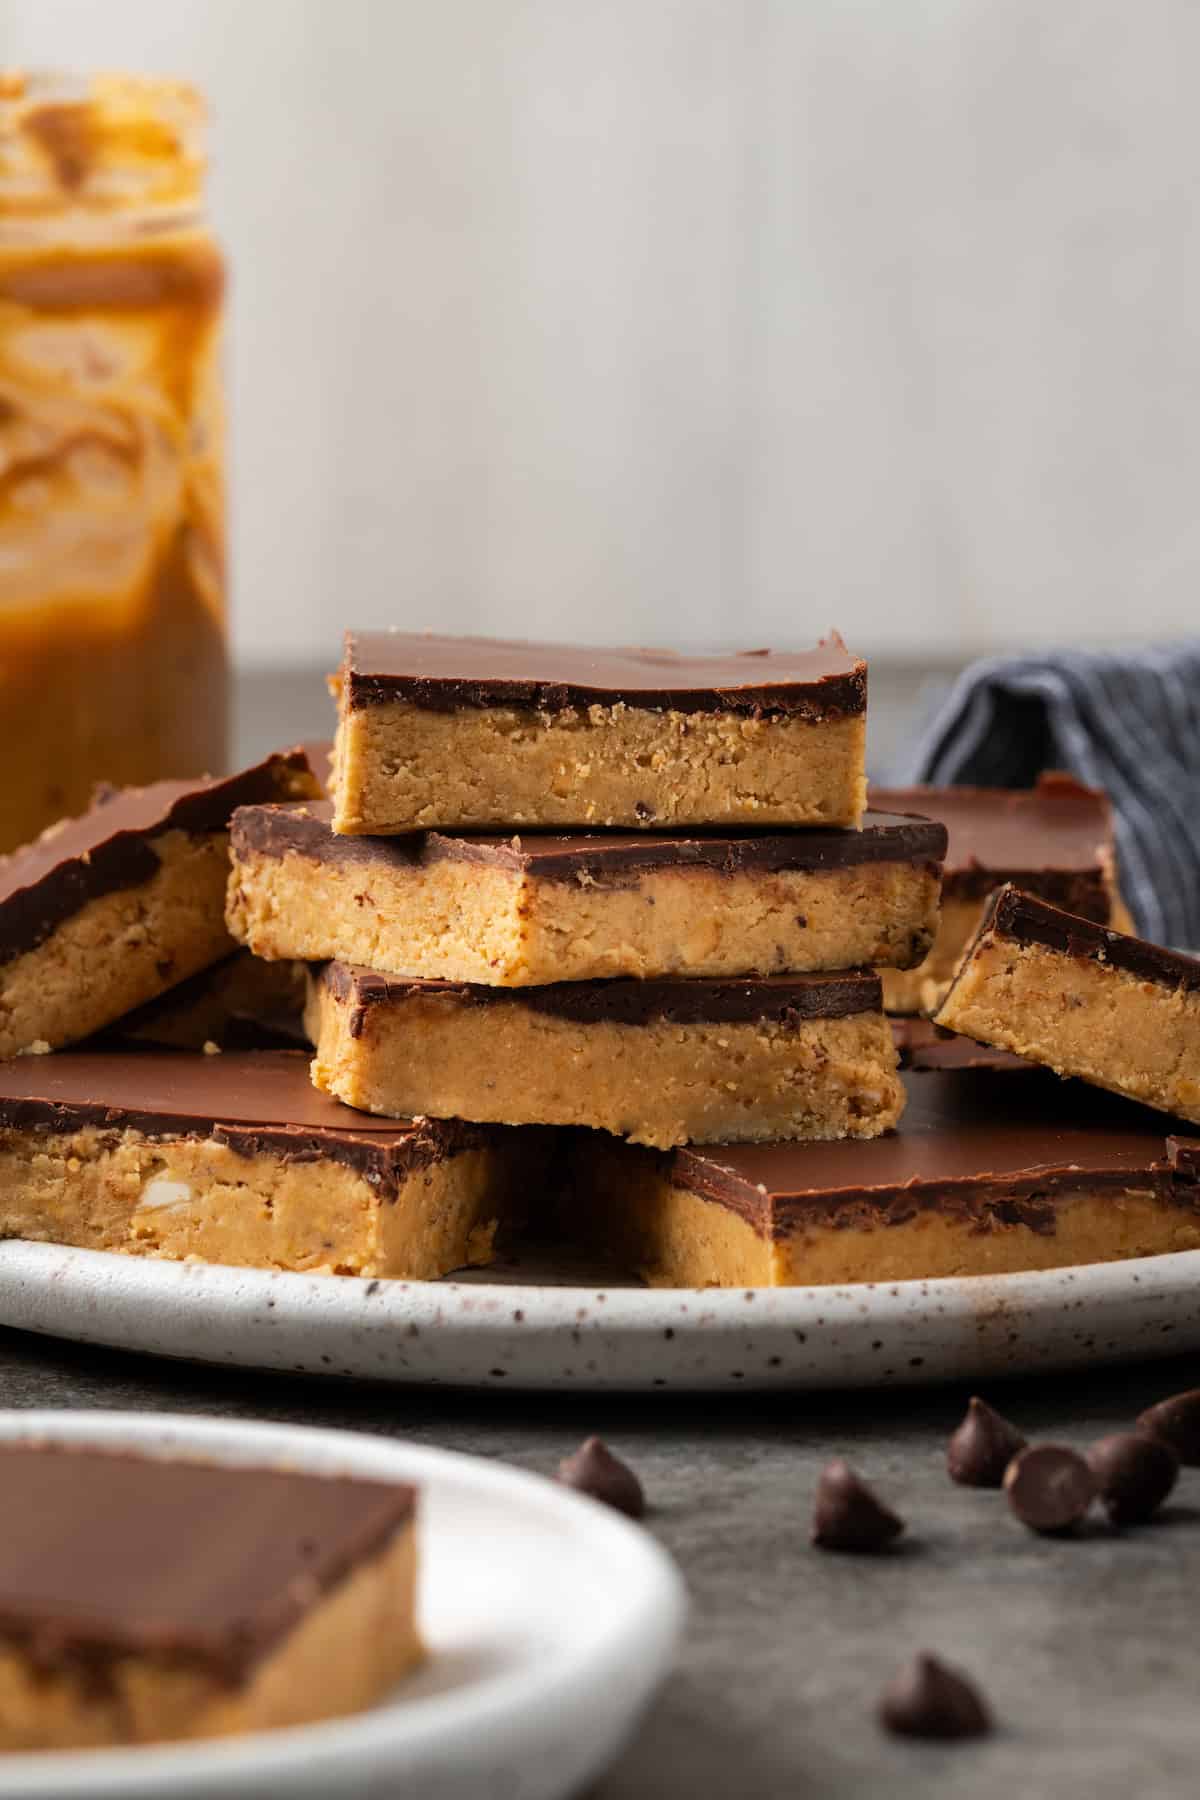 Side view of chocolate peanut butter bars stacked on a white plate, with a jar of peanut butter in the background.